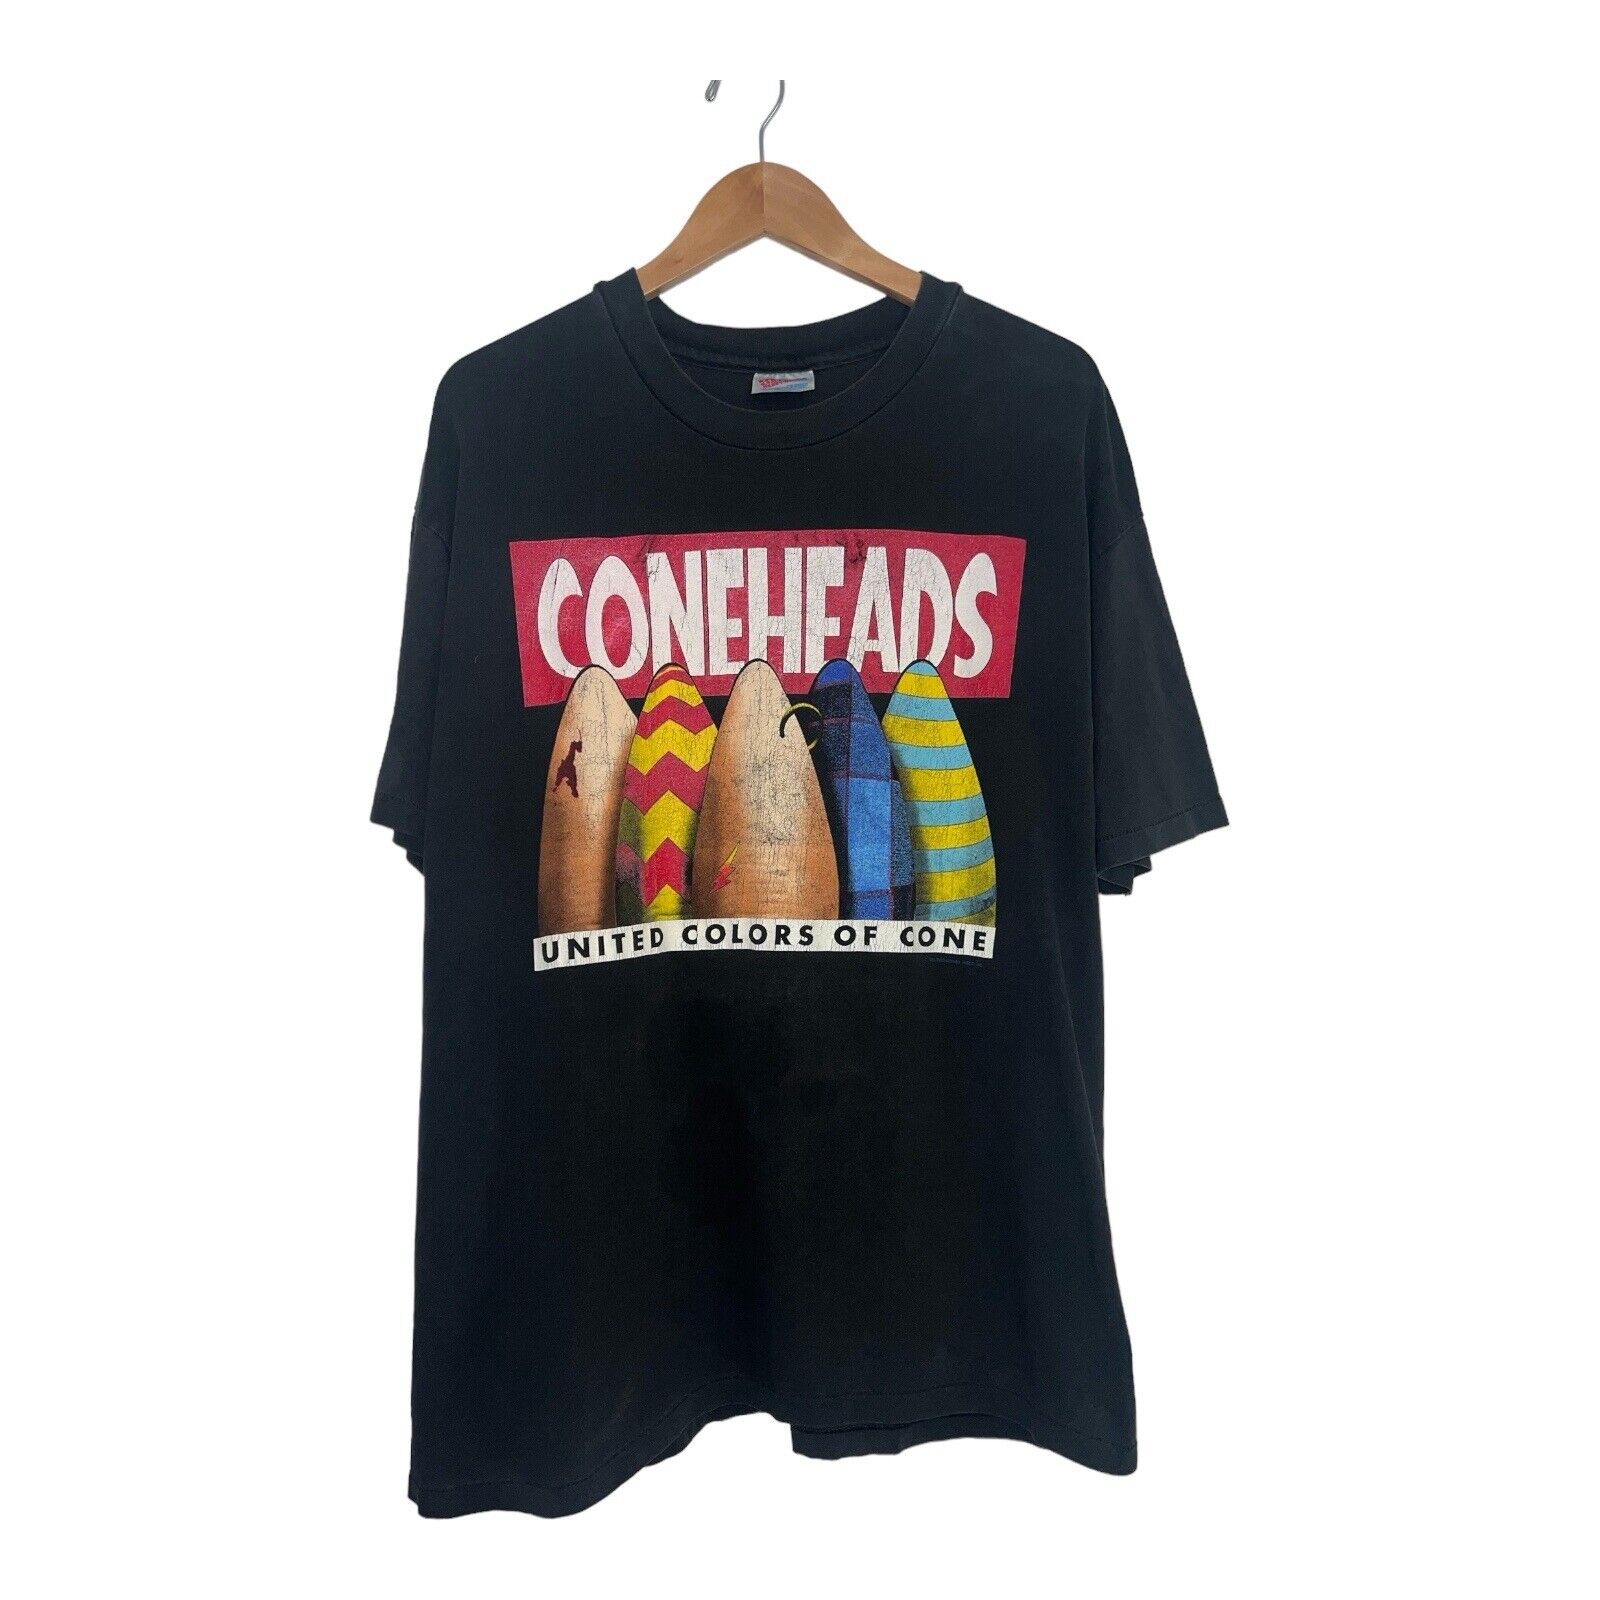 Vintage Coneheads Shirt 1990s Rare SNL TV Movie Promo Funny Colors Comedy 90s XL